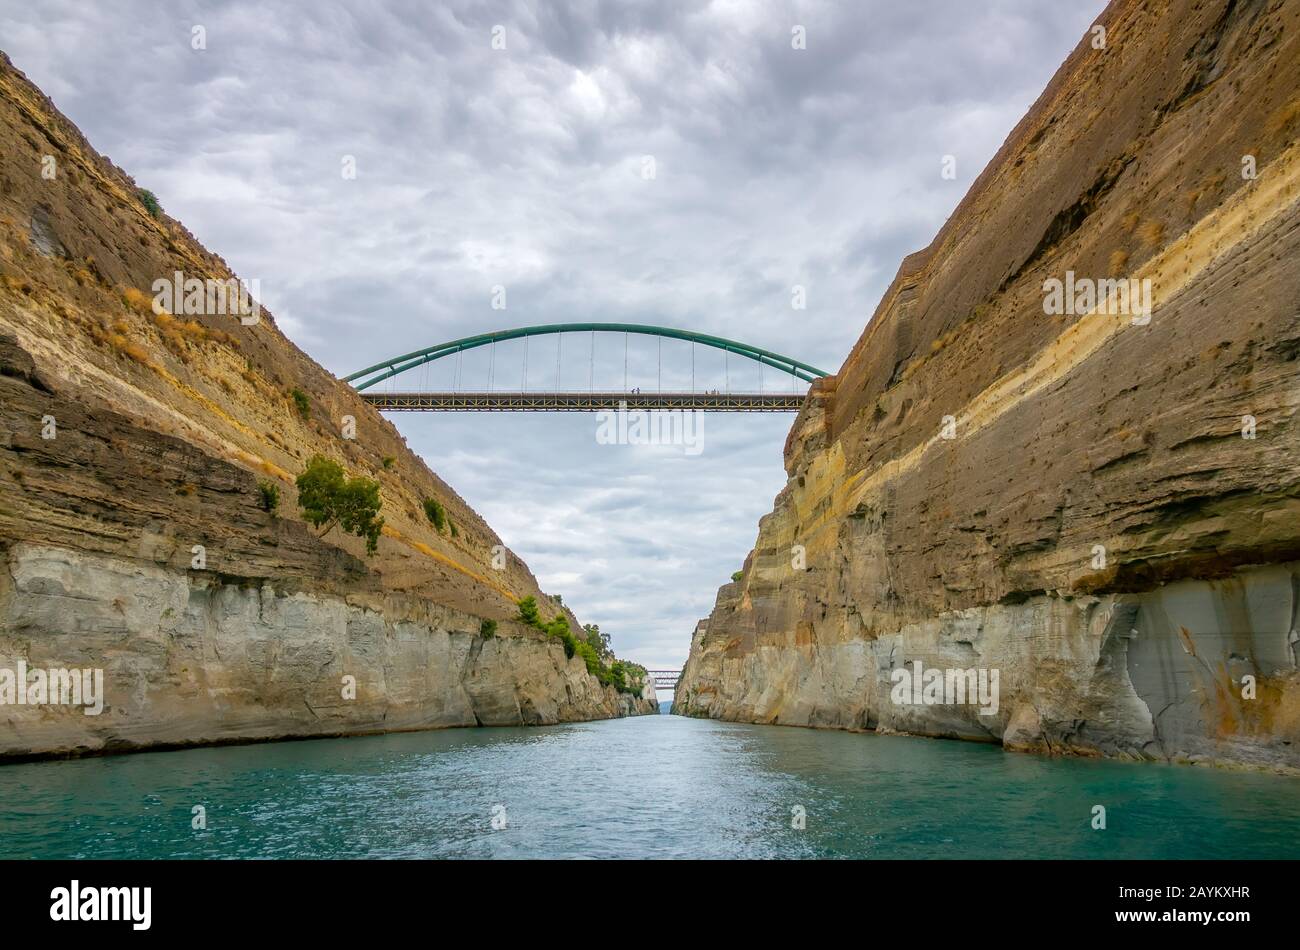 Greece. Old Corinth Canal. Overcast weather. Several bridges Stock Photo